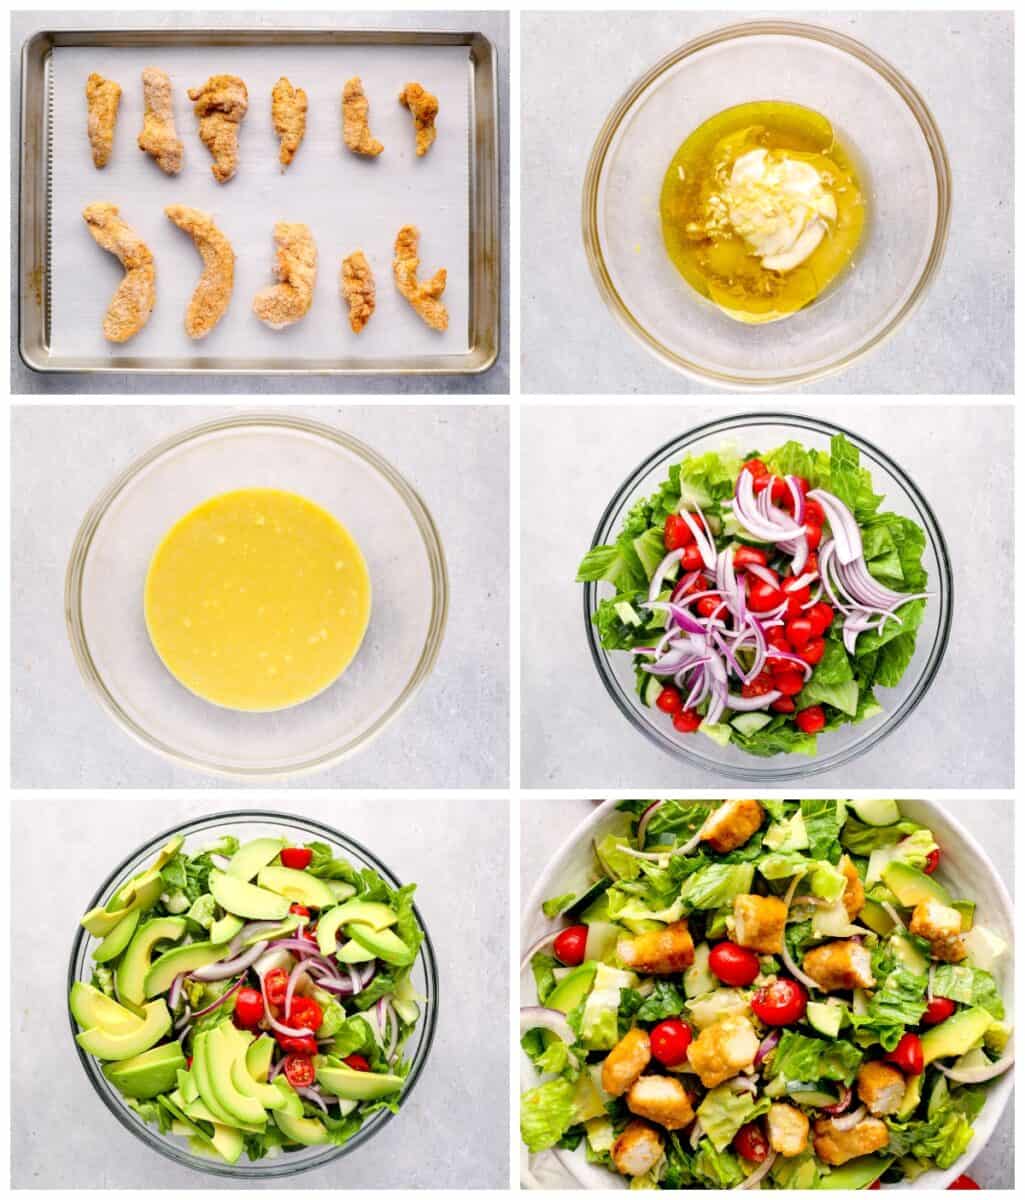 how to make crispy chicken salad step by step photo instructions